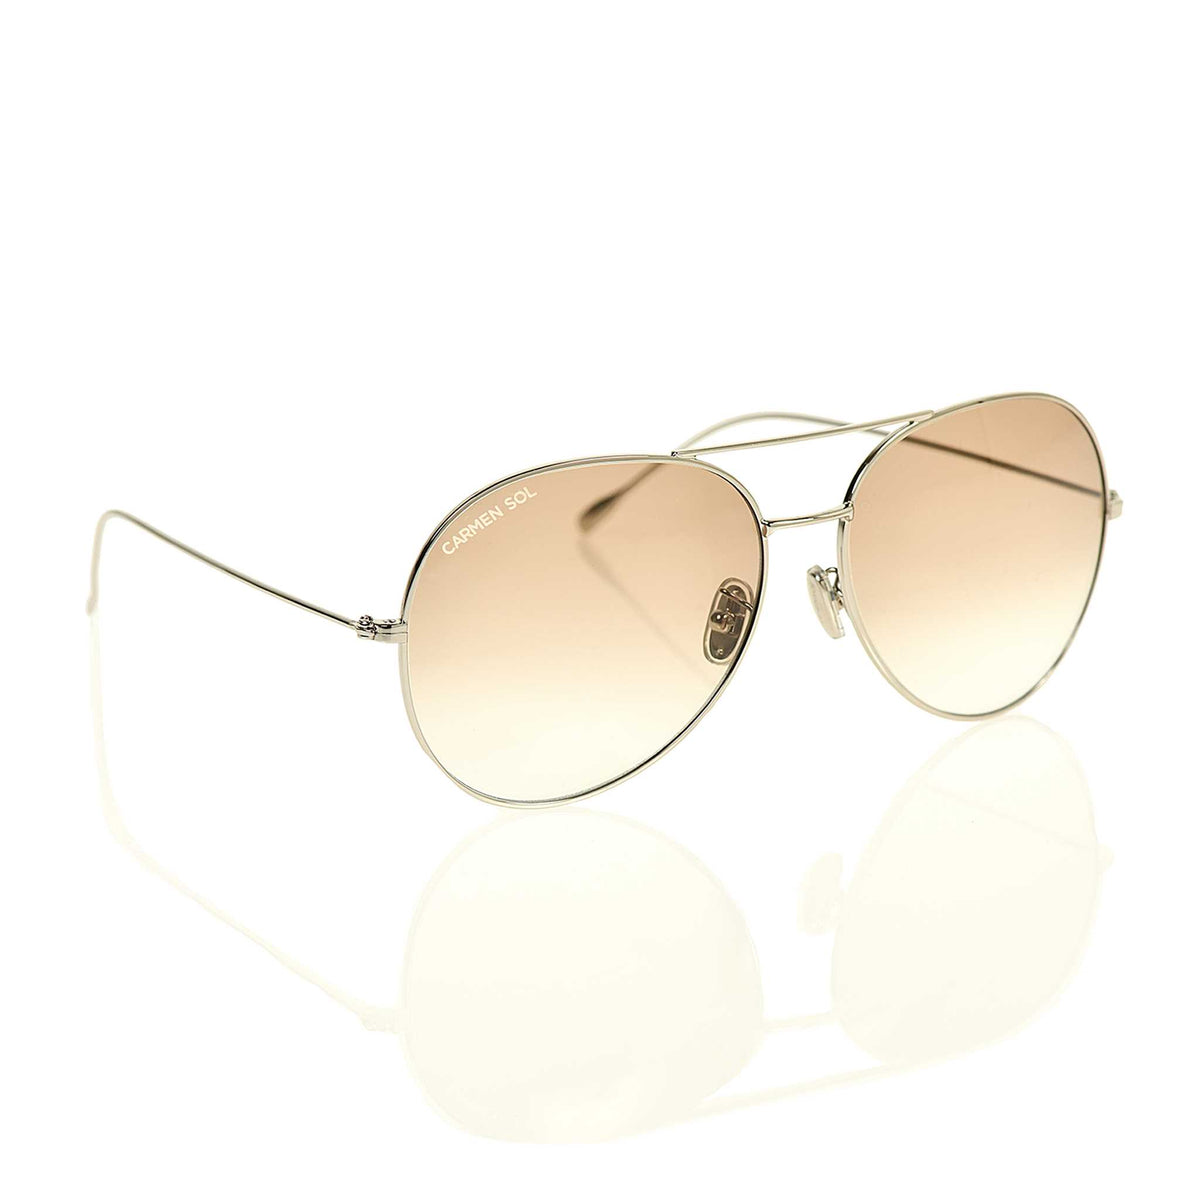 Silver sunglasses for men and for women with gradient sexy lenses in nude color